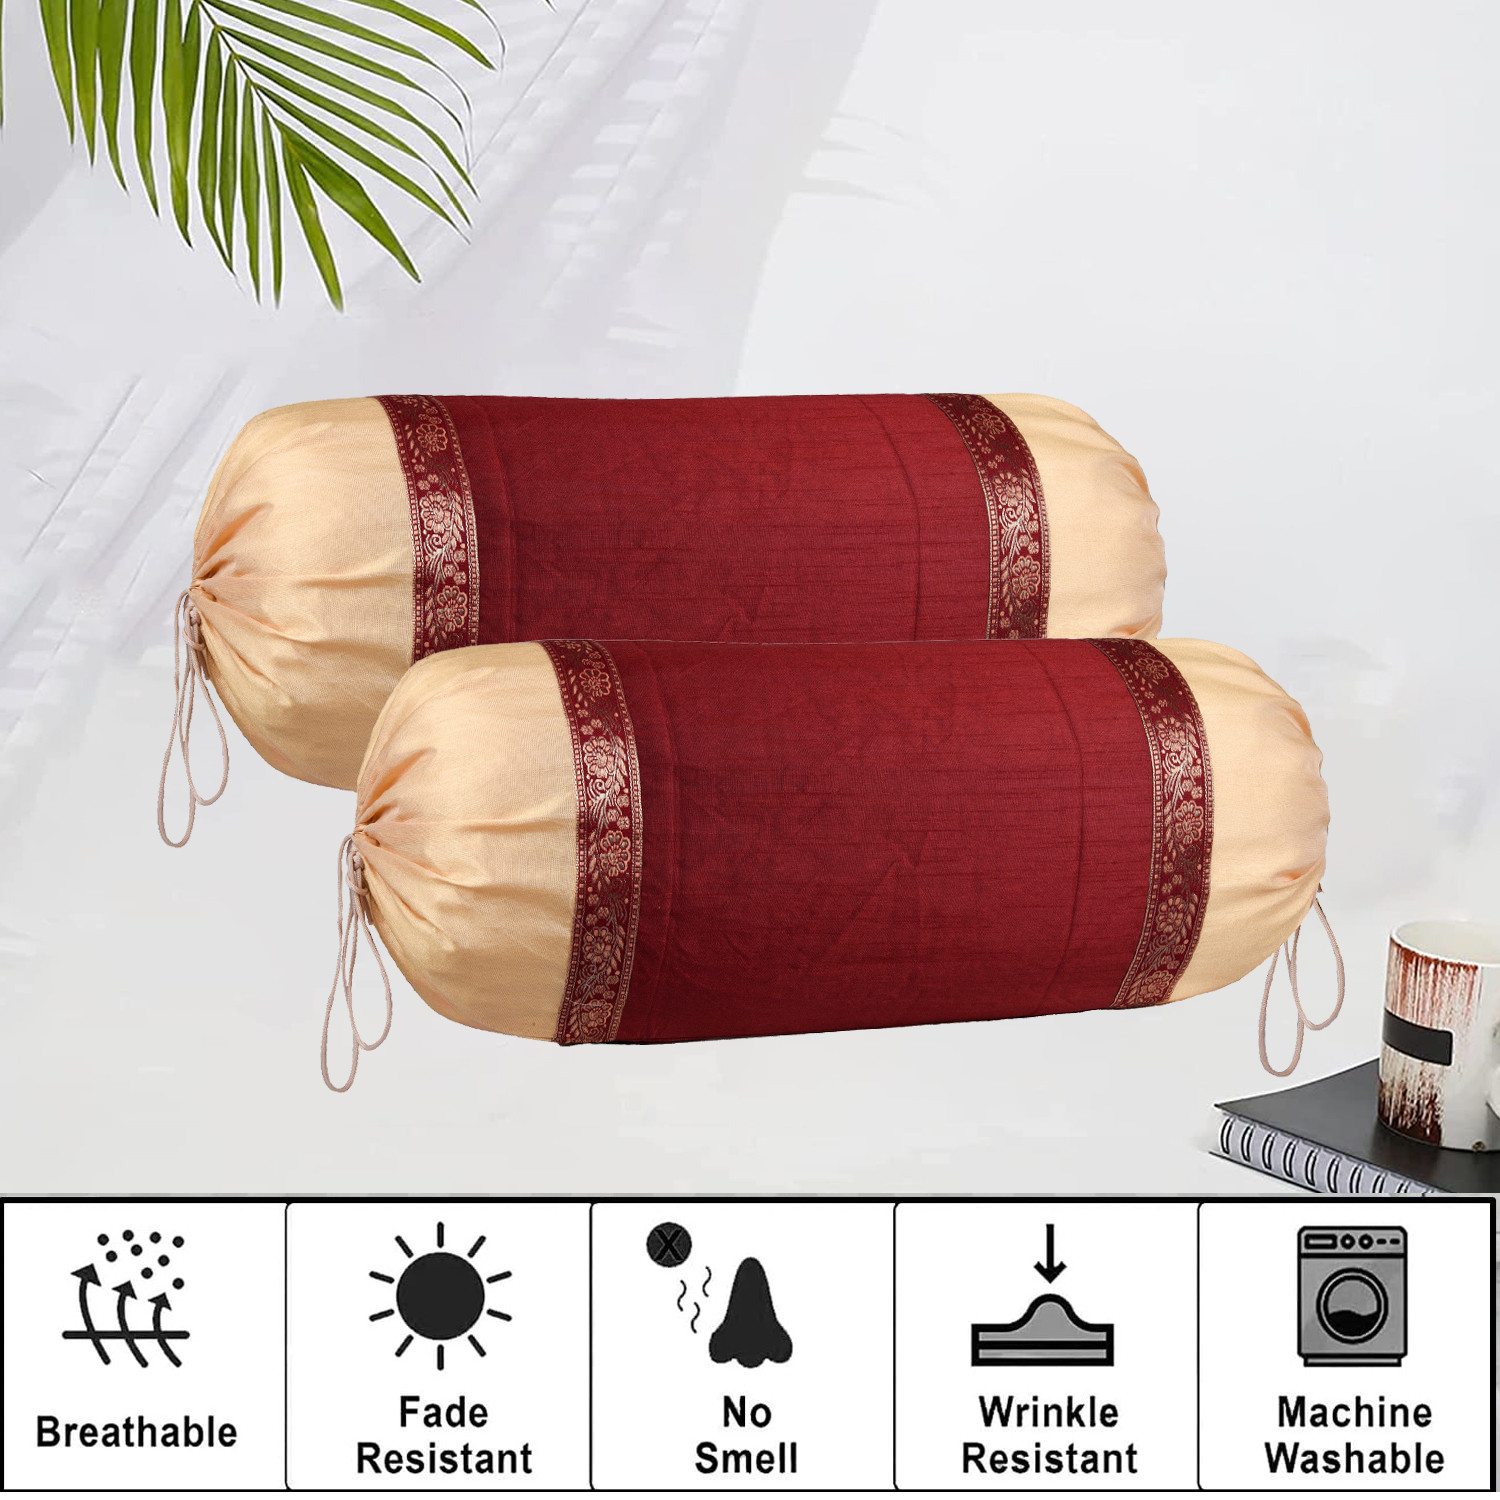 Kuber Industries Bolster Covers | Dupion Polyester Bolster Cover Set | Diwan Bolster Cover Set | Bolster Pillow Cover | Lace Design Masand Cover | 16x32 Inch | Pack of 4 | Maroon